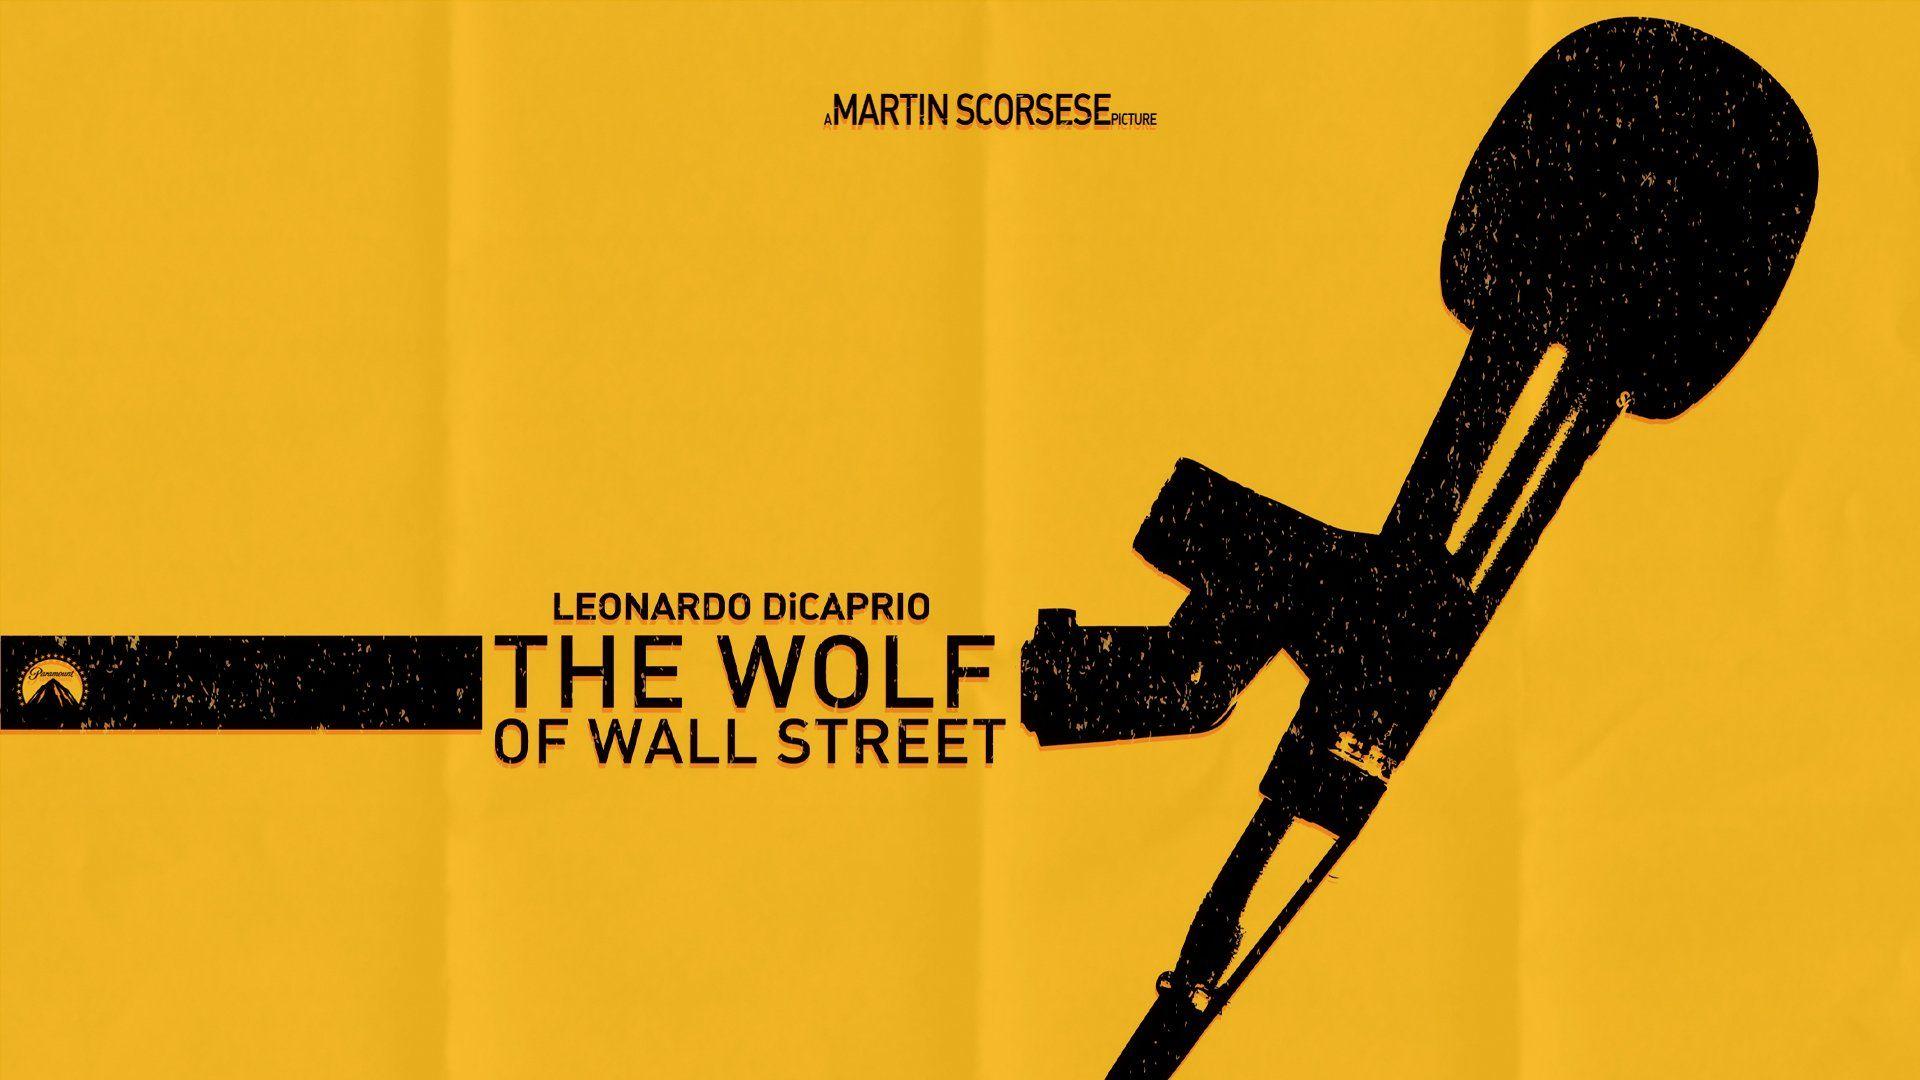 The wolf of wall street wallpapers